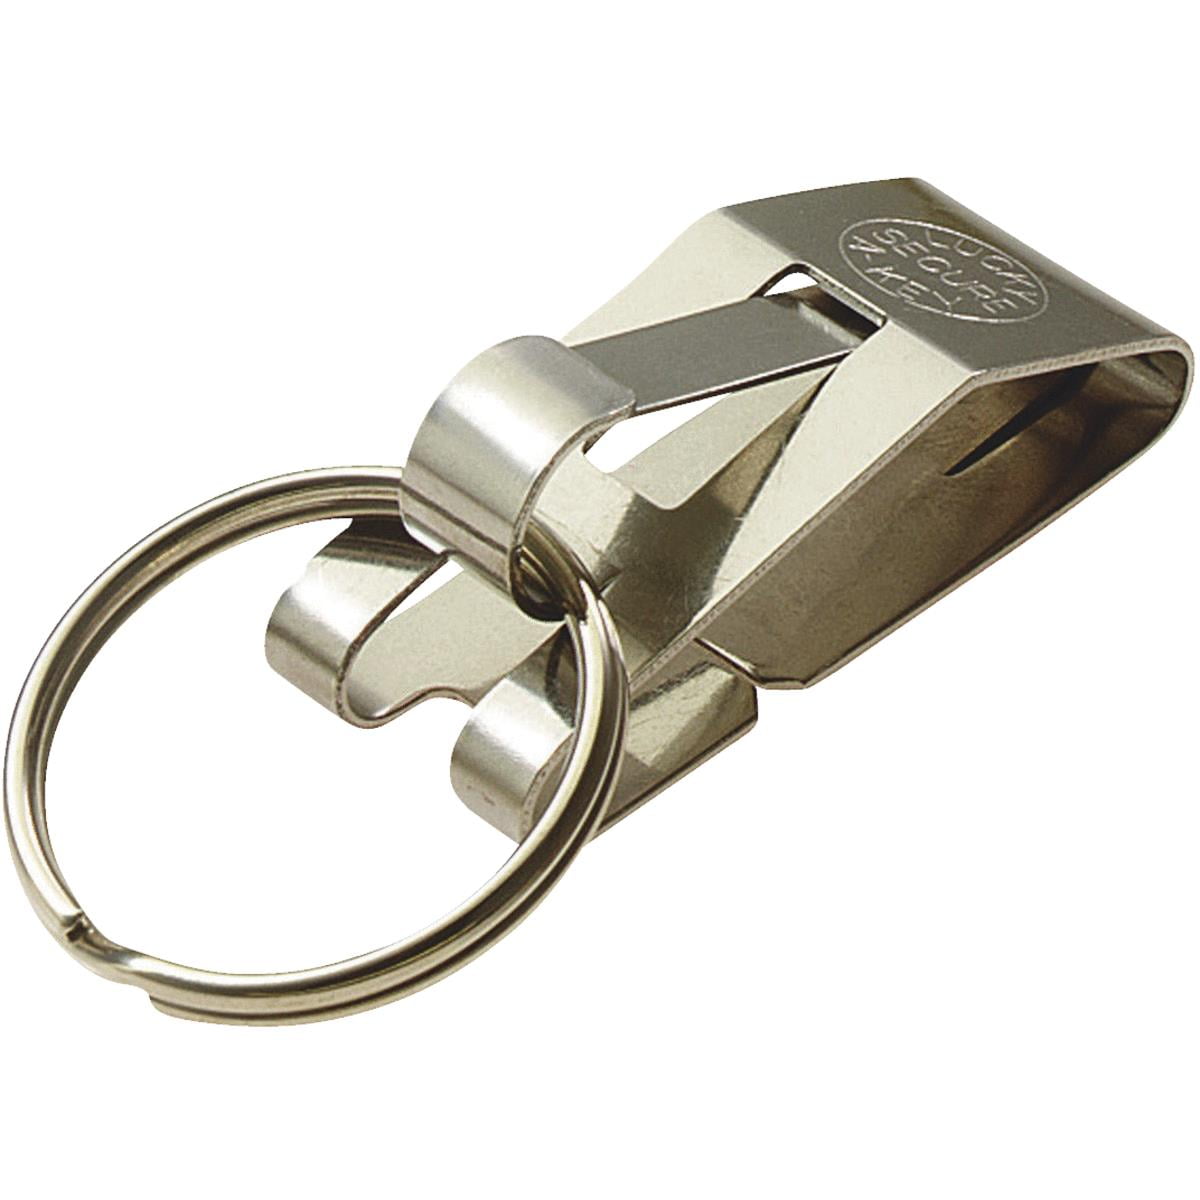 Stainless Steel Compact Quick Release Keychain Belt Clip Key Ring Holder BR 